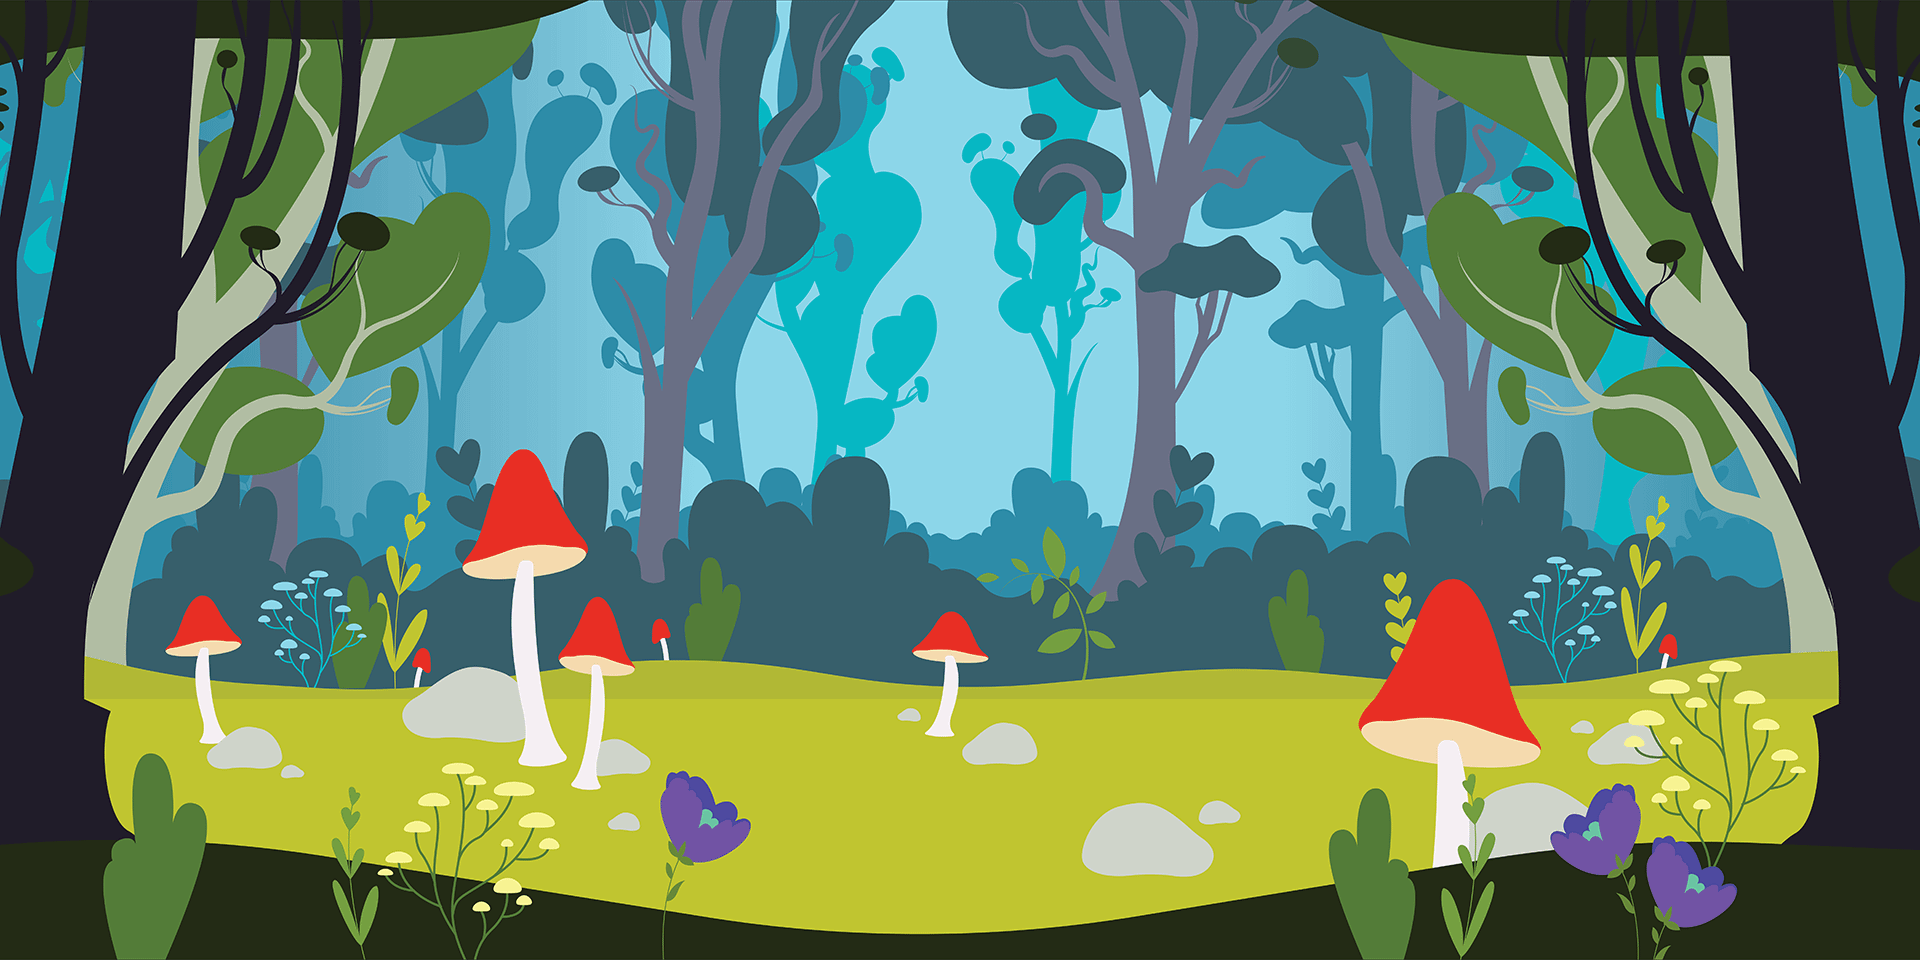 In-progress of environment illustration with vector shapes